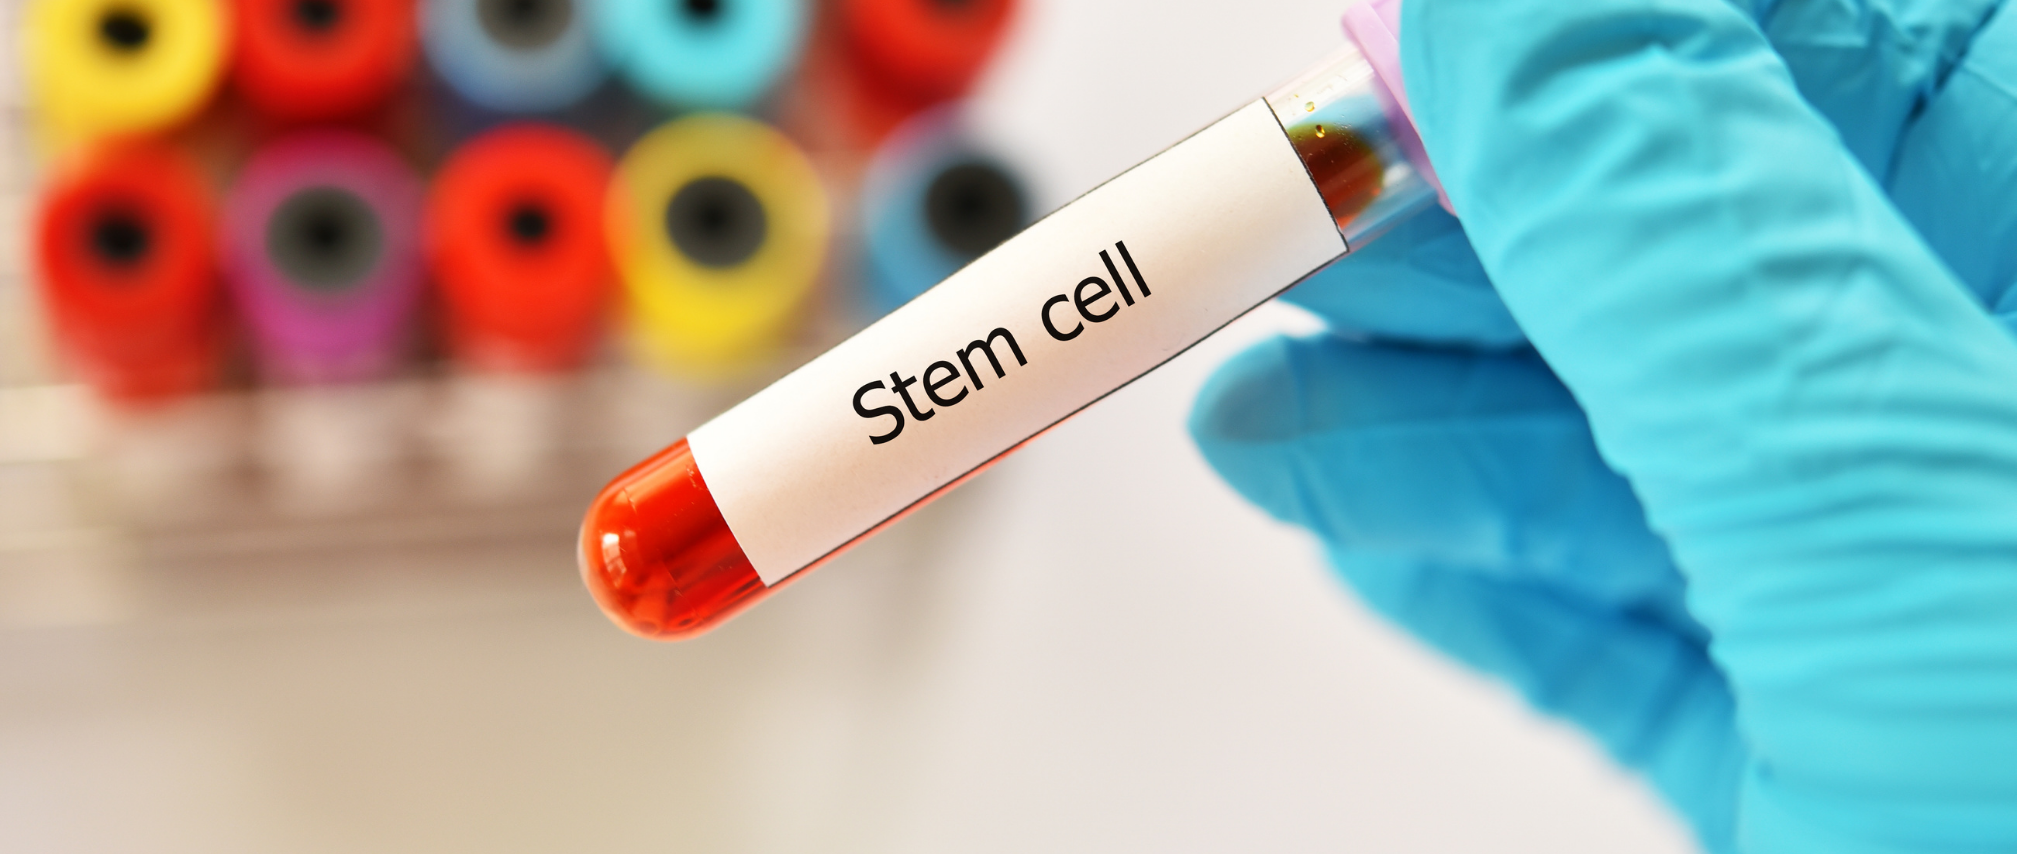 #InTheNews: U.S. patient becomes 1st woman cured of HIV after stem cell transplant